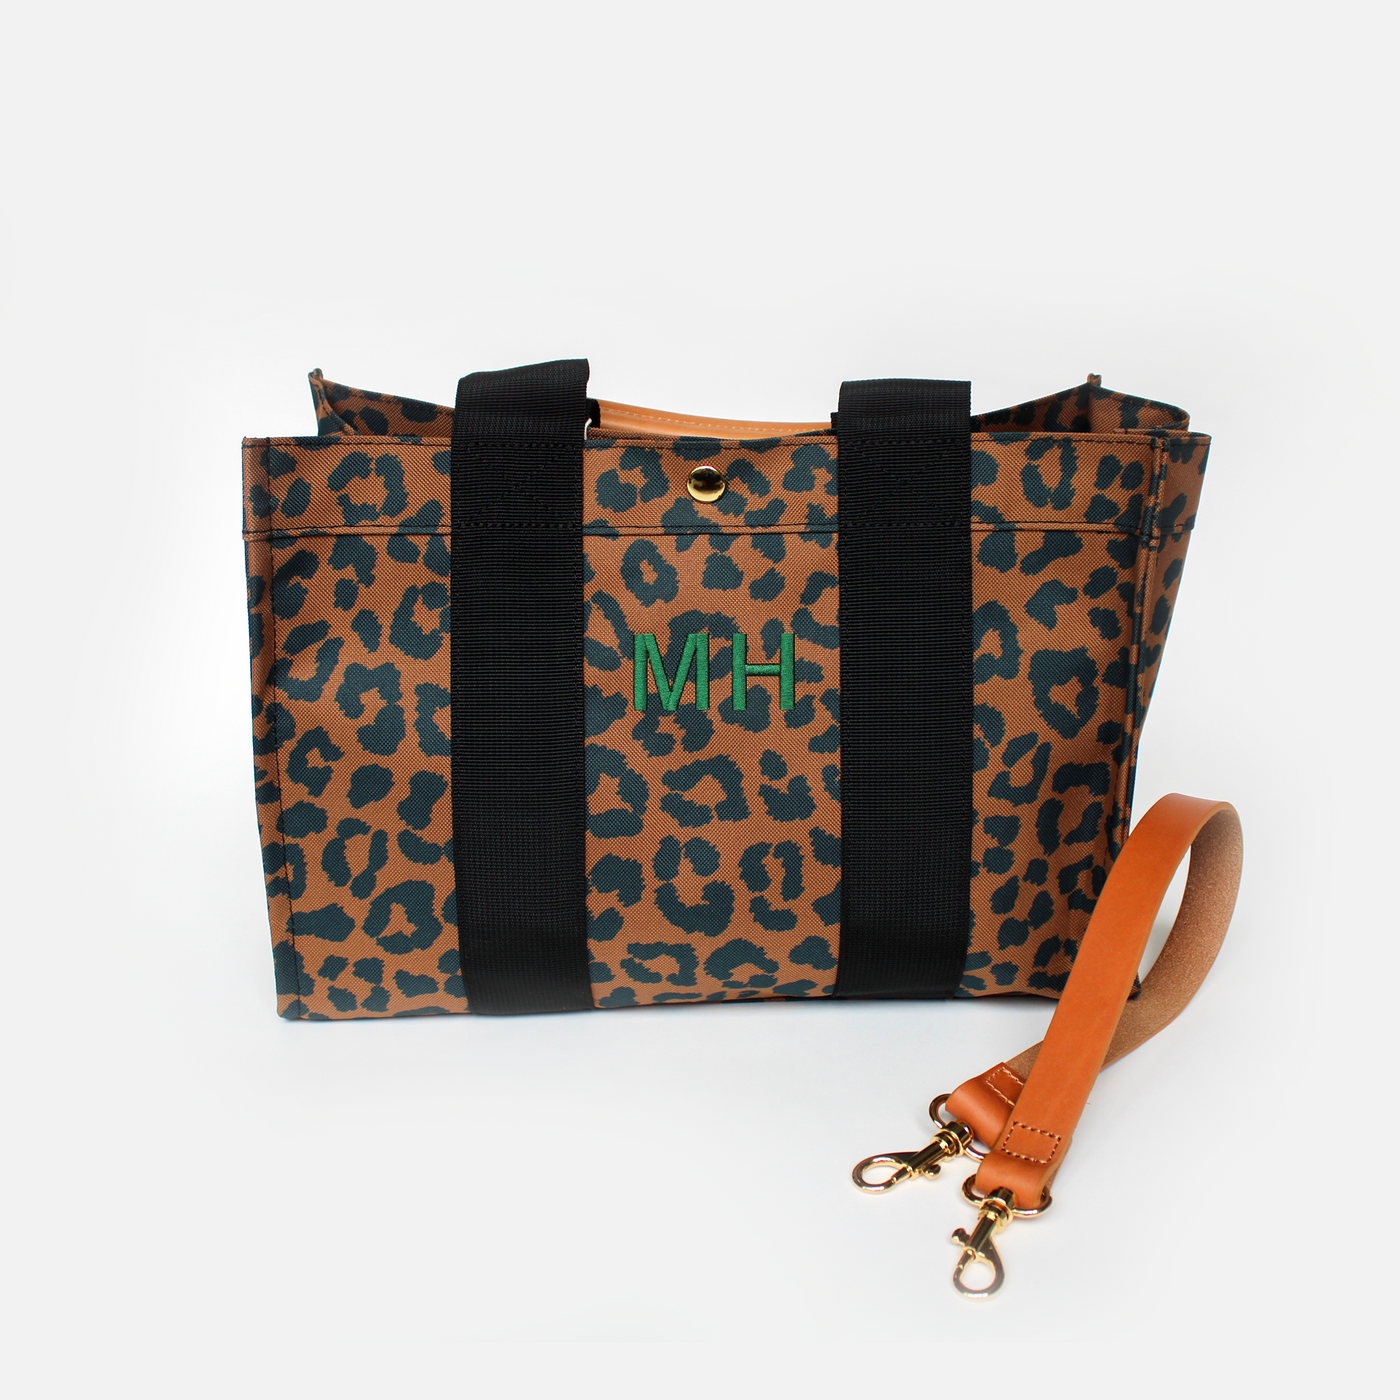 Boulevard Leopard Kylie tote with monogram